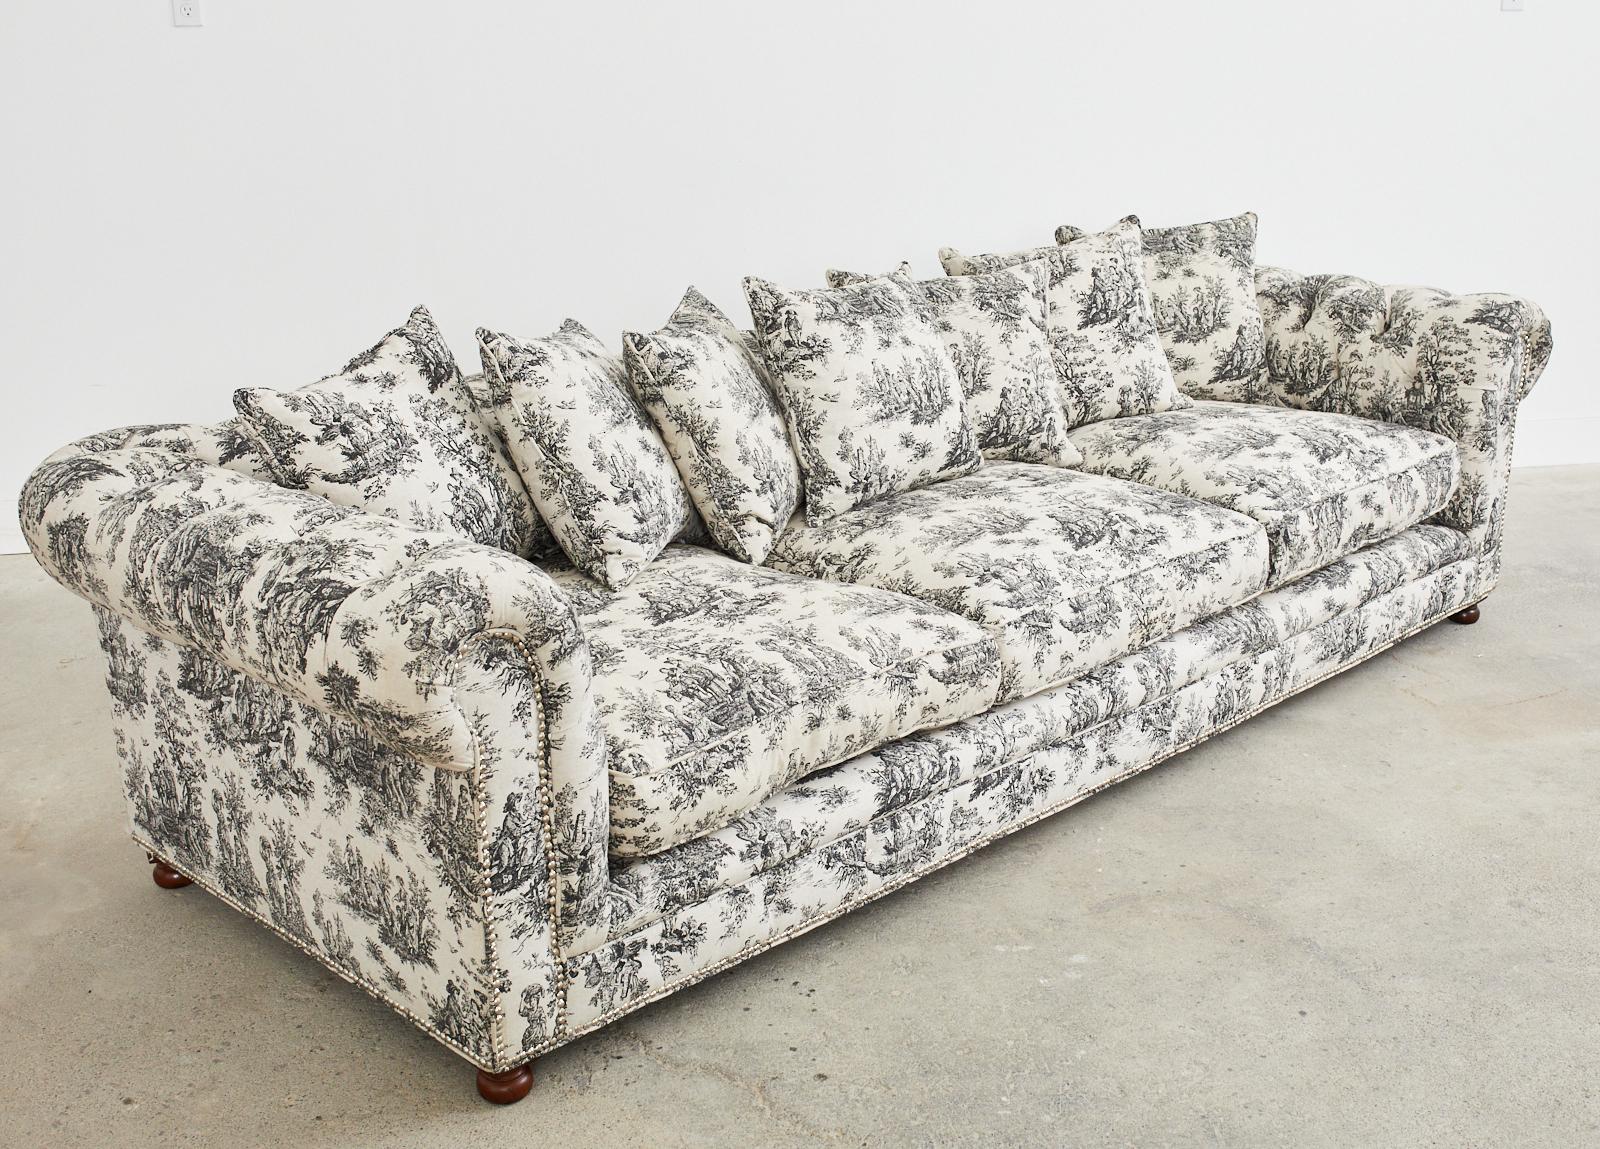 Christian Audigier Grande-Dame French Provincial Toile Tufted Sofa For Sale 2